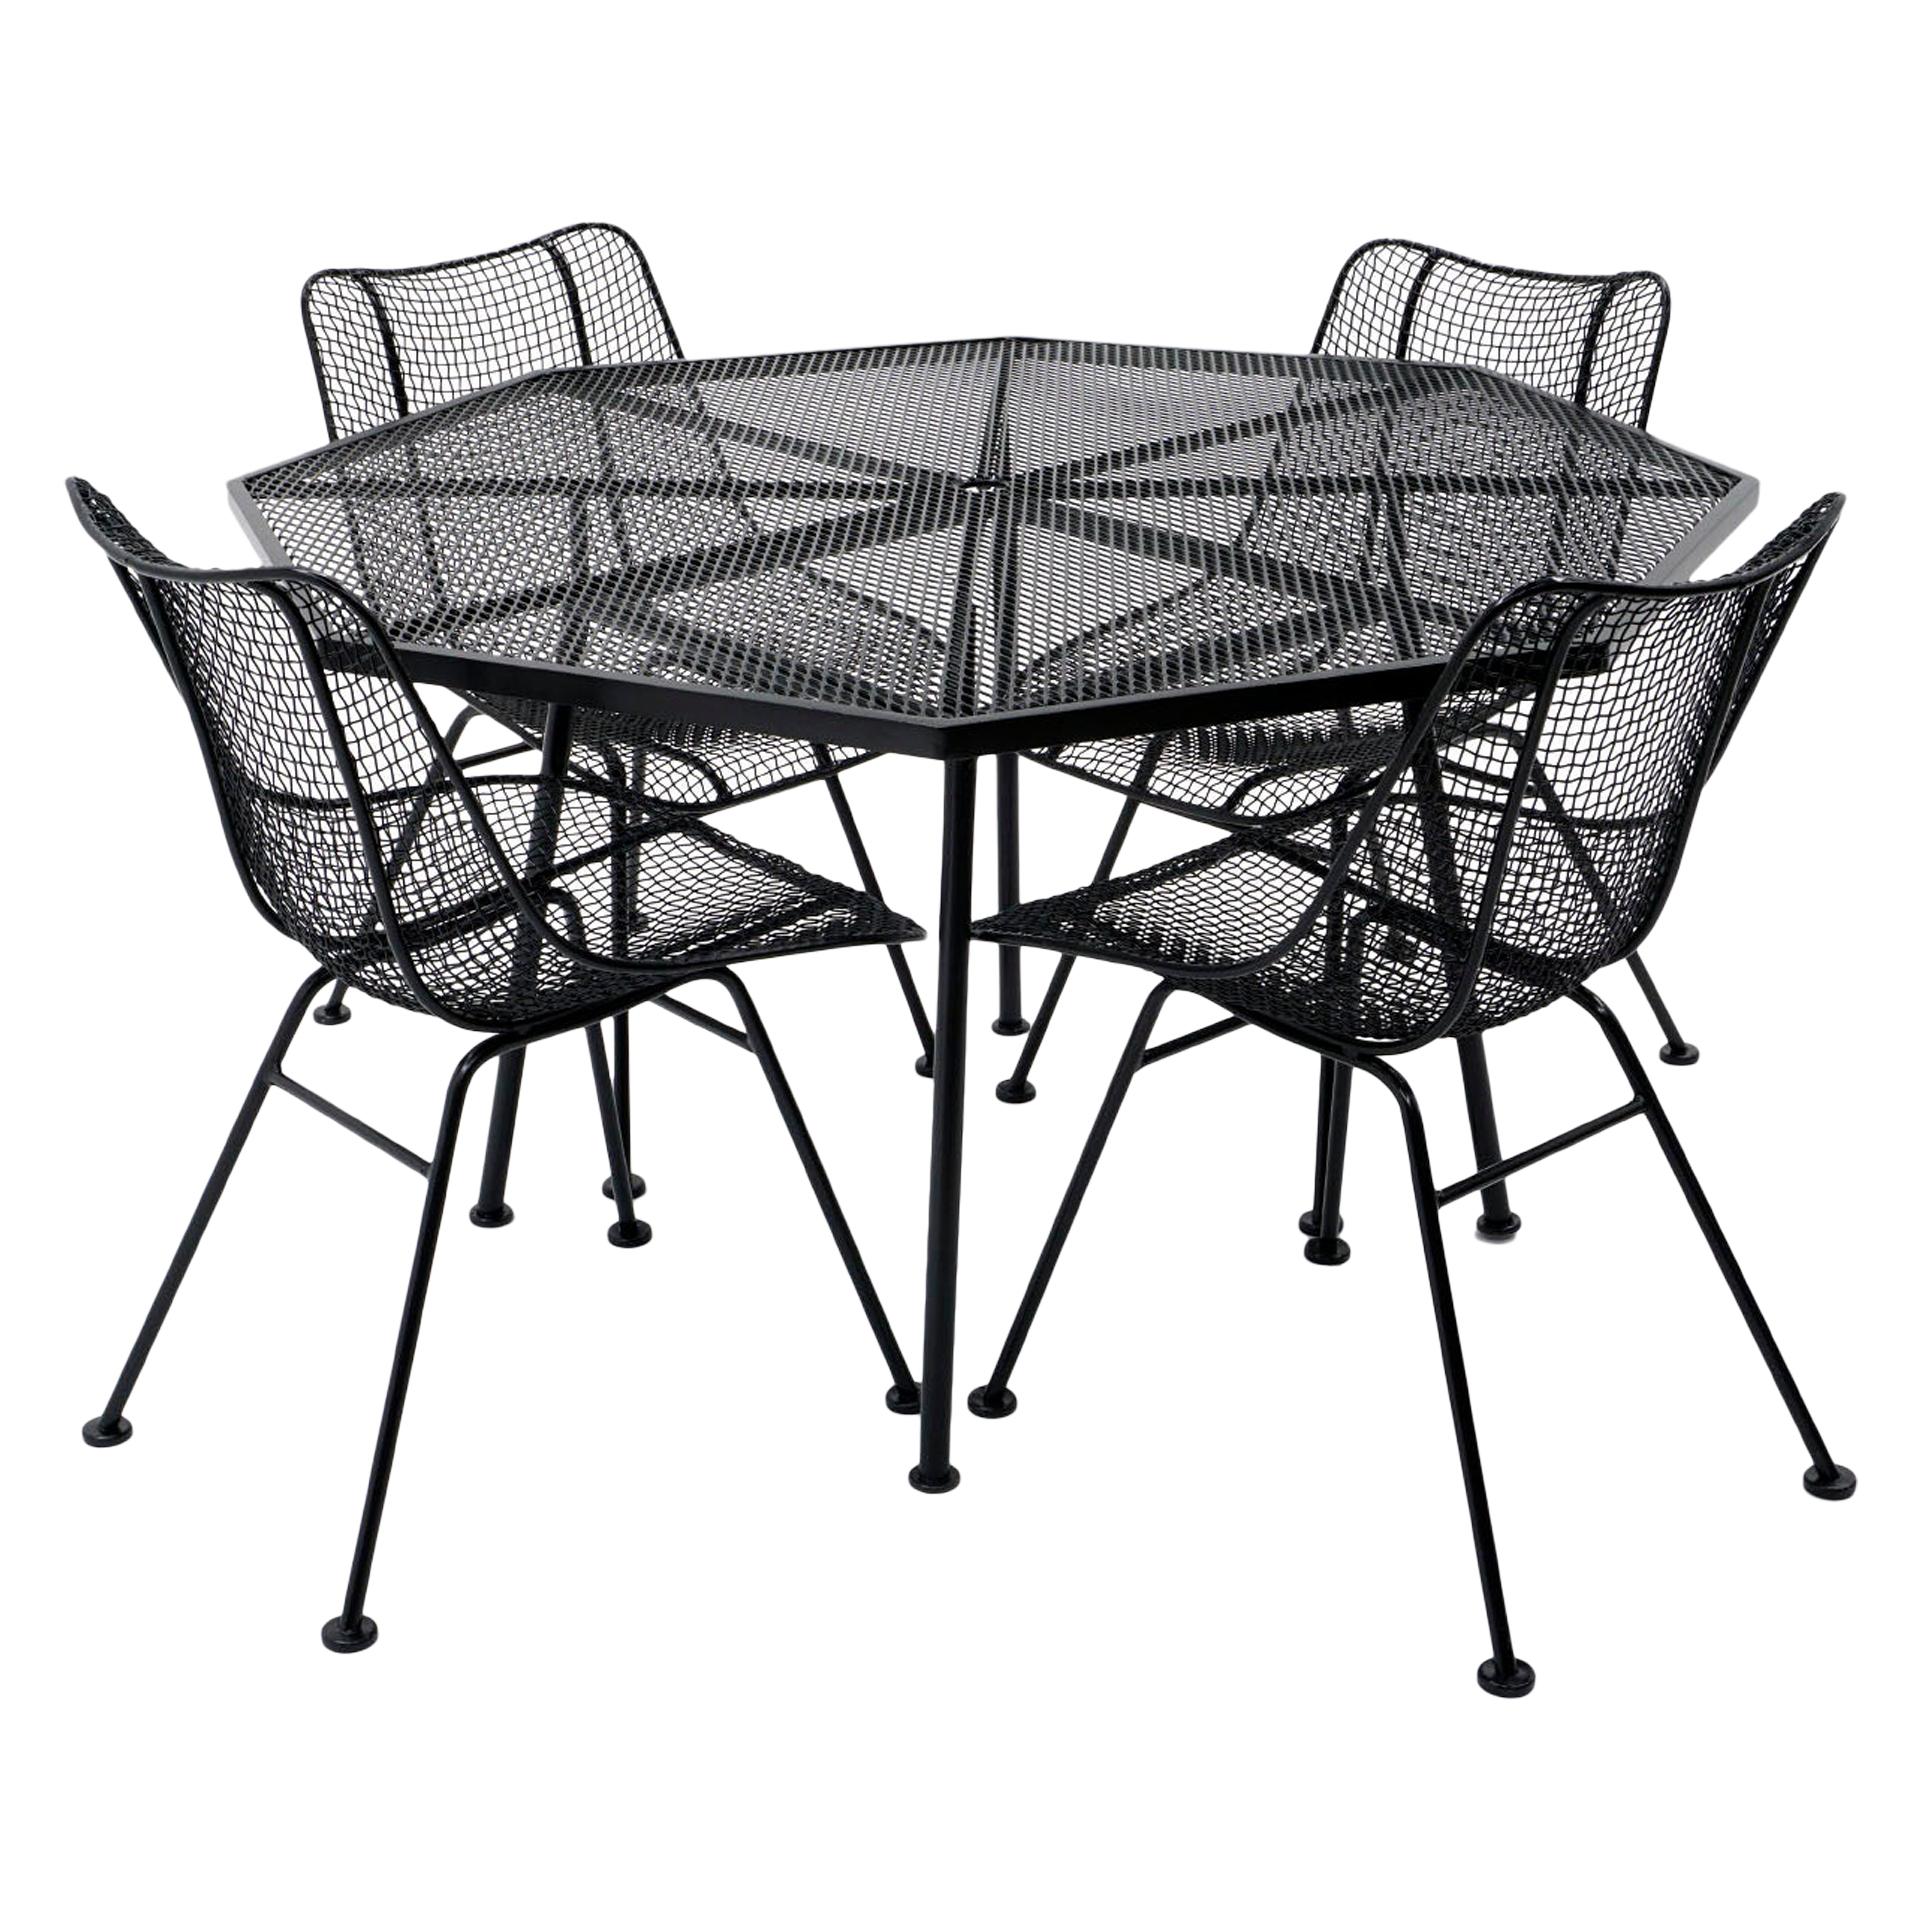 Sculptura Outdoor Dining Table with Four Chairs by Russel Woodard, Restored